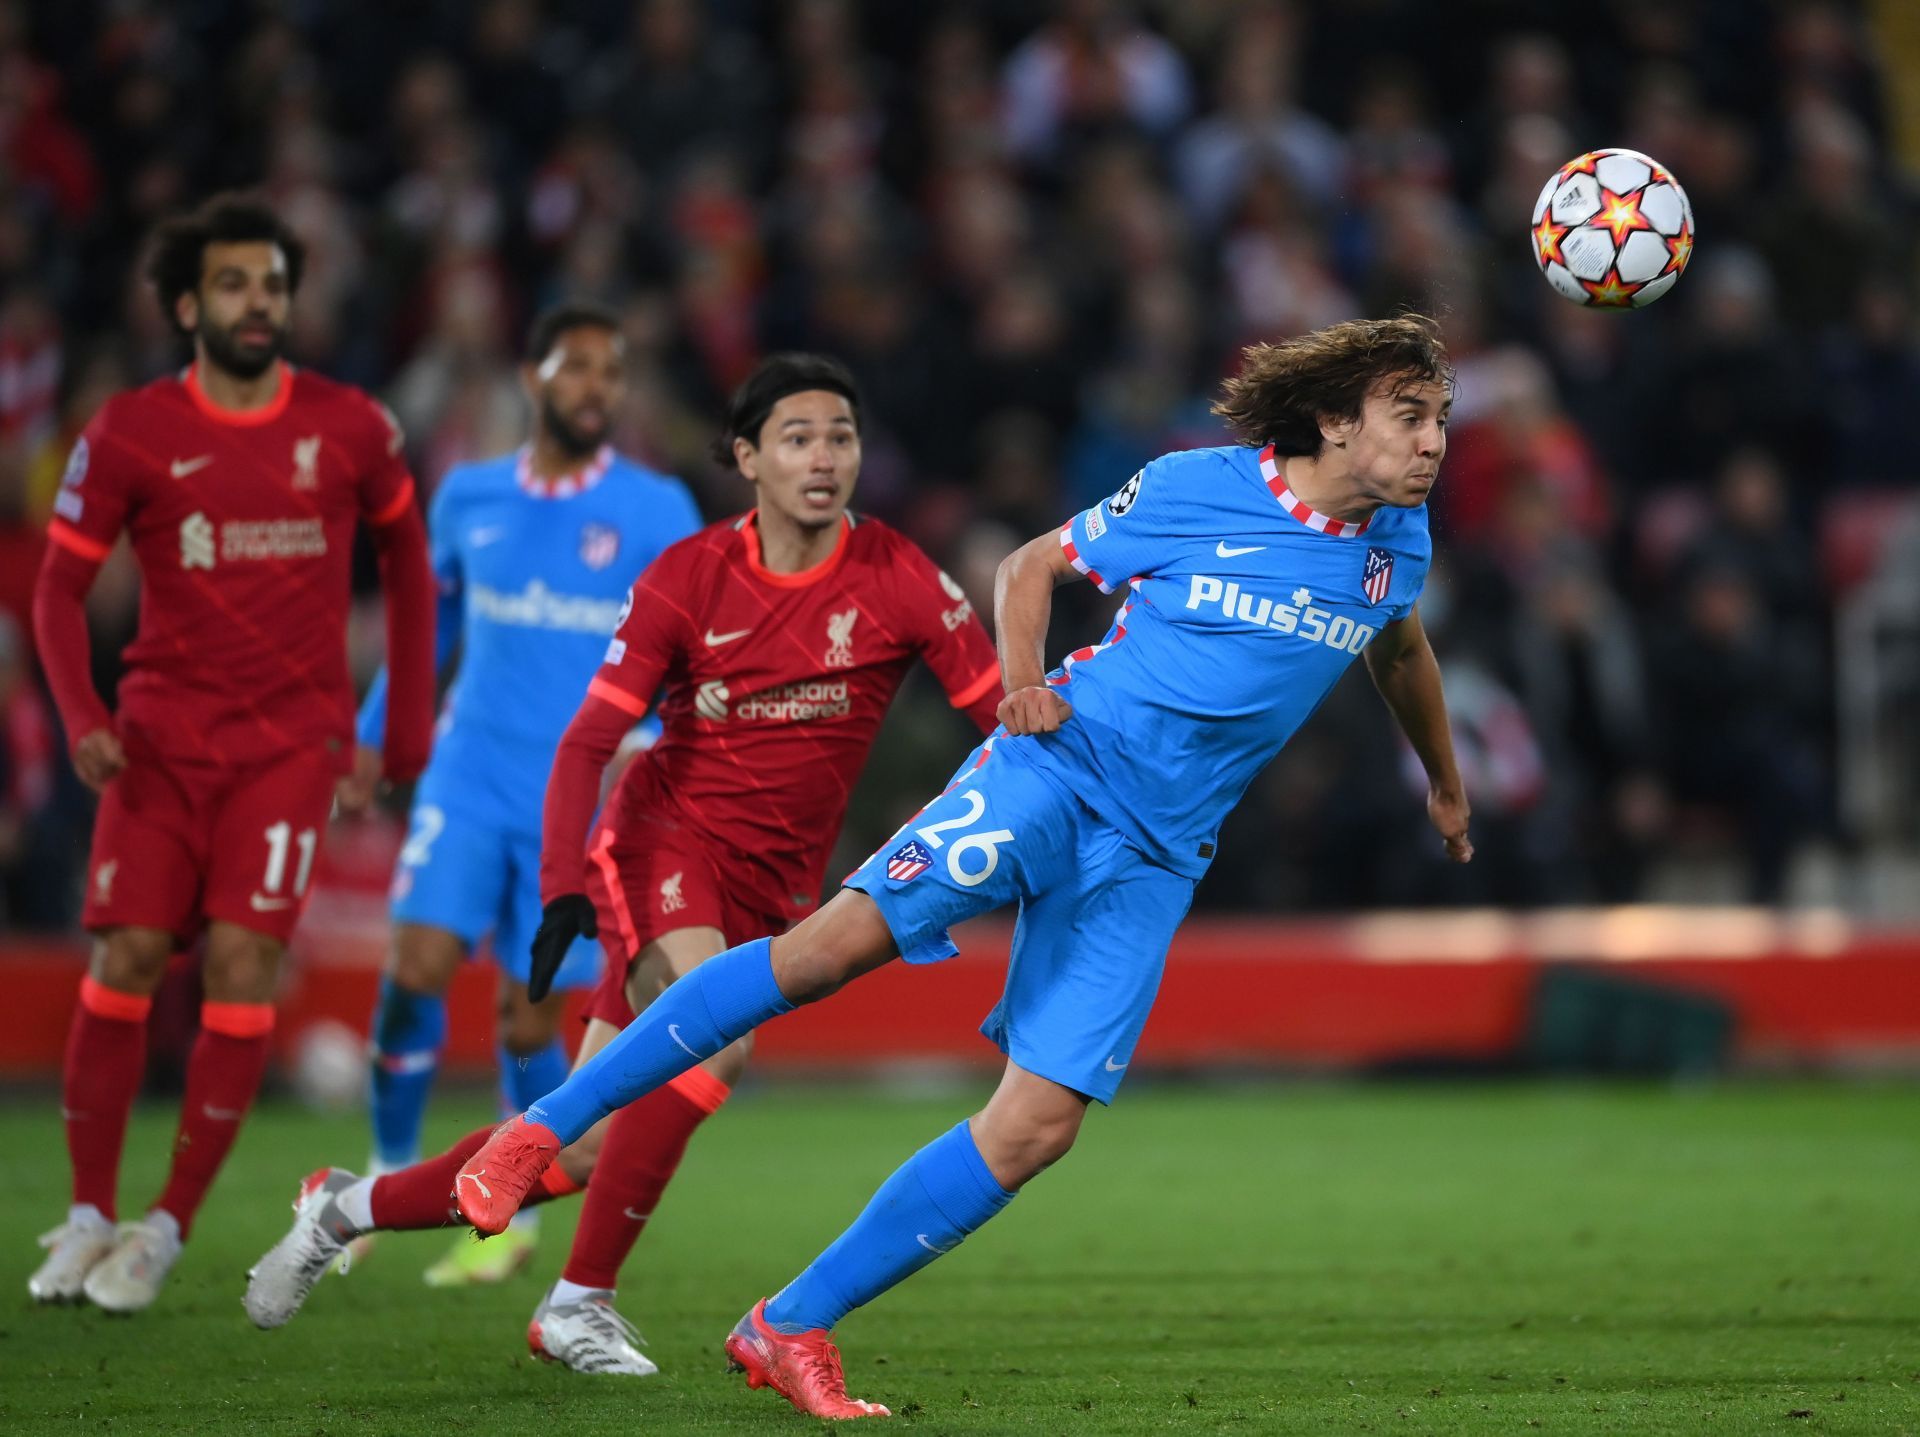 Liverpool defeated Atletico Madrid 2-0 in the UEFA Champions League on Wednesday